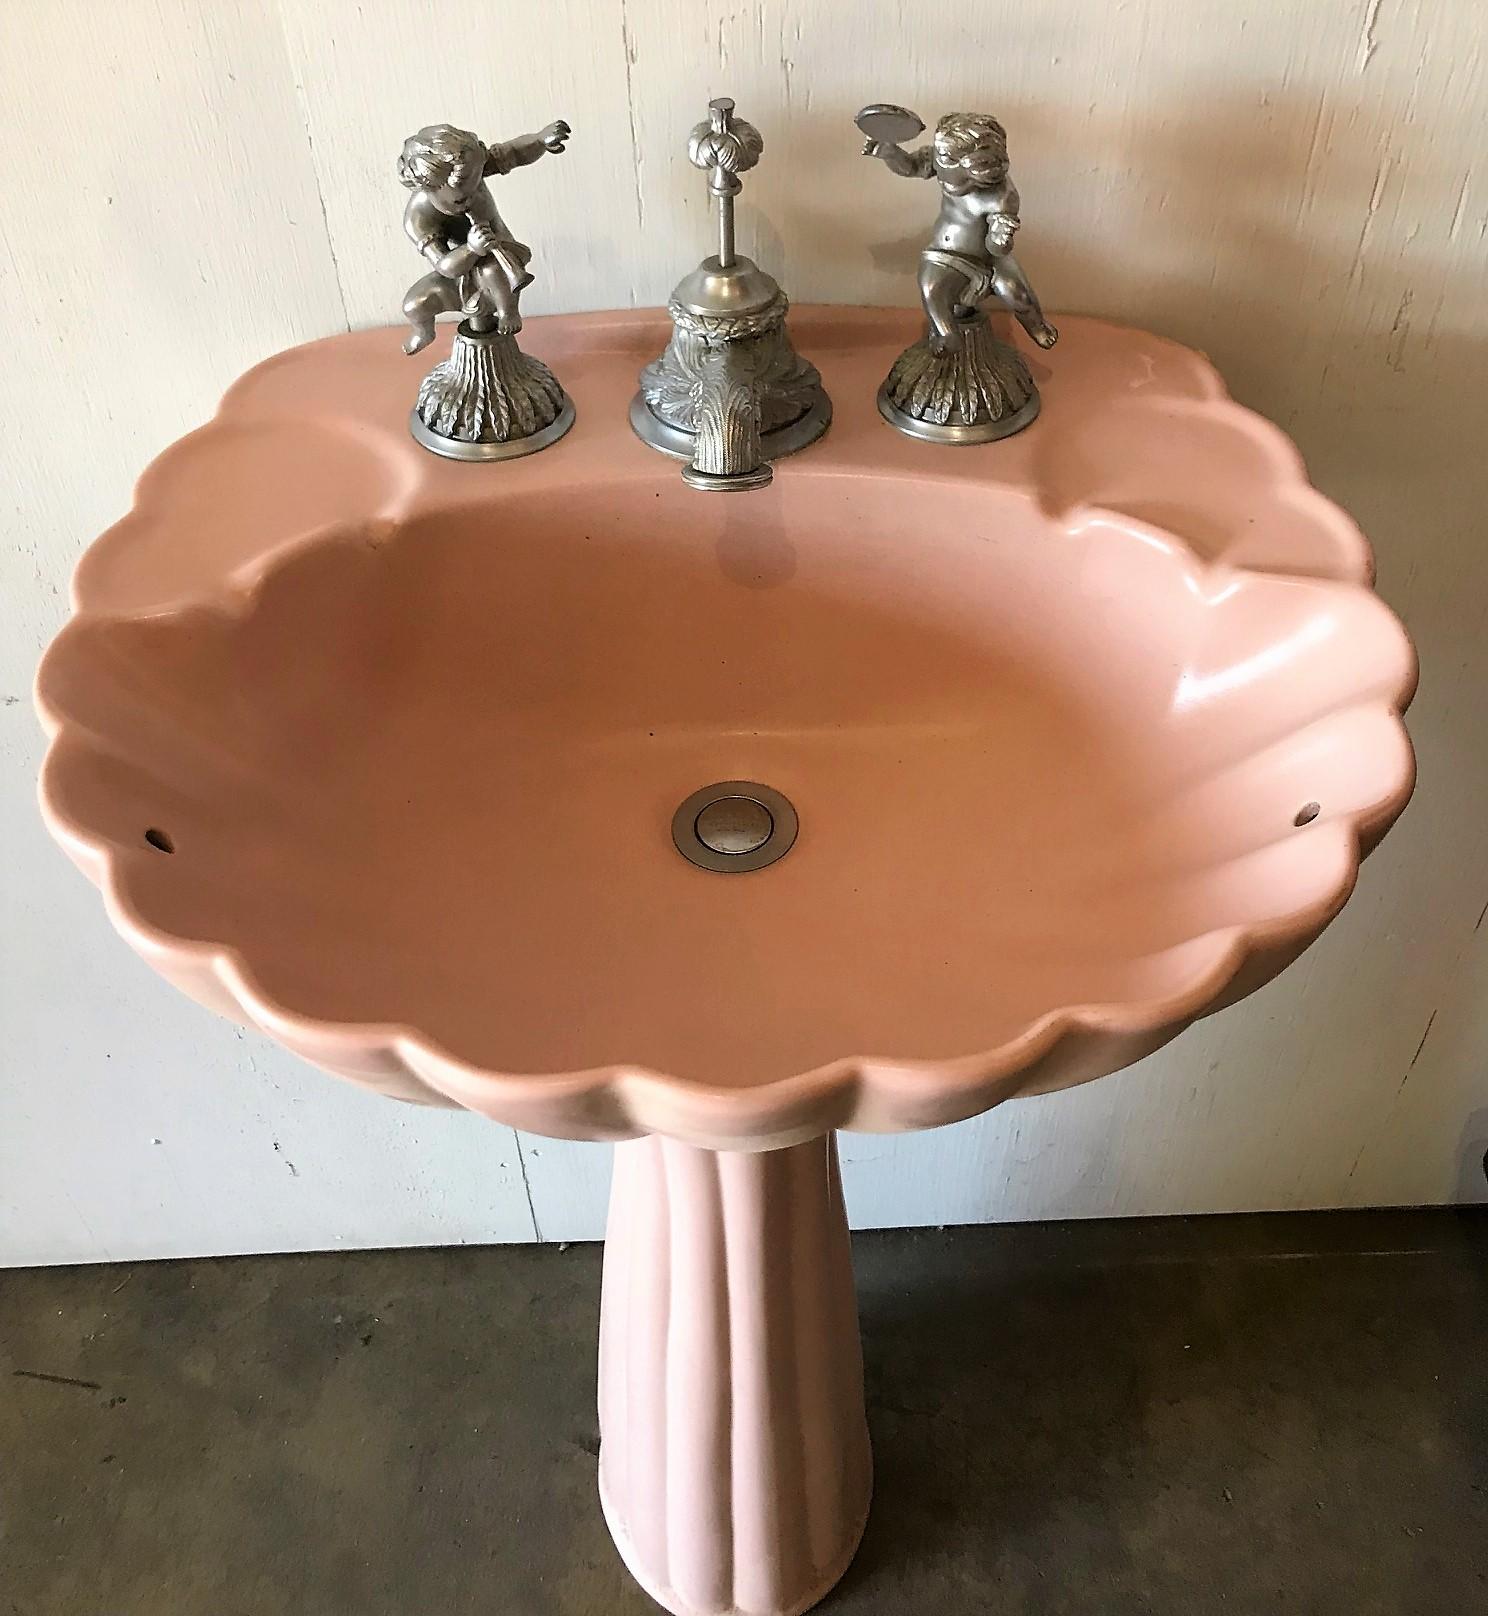 Highly sought-after Sherle Wagner pink porcelain pedestal sink with a scalloped shell-shaped basin and mounted with sculpted nickel-plated musical cherub handles. Acanthus leaf motif faucet and stopper. Stamped 